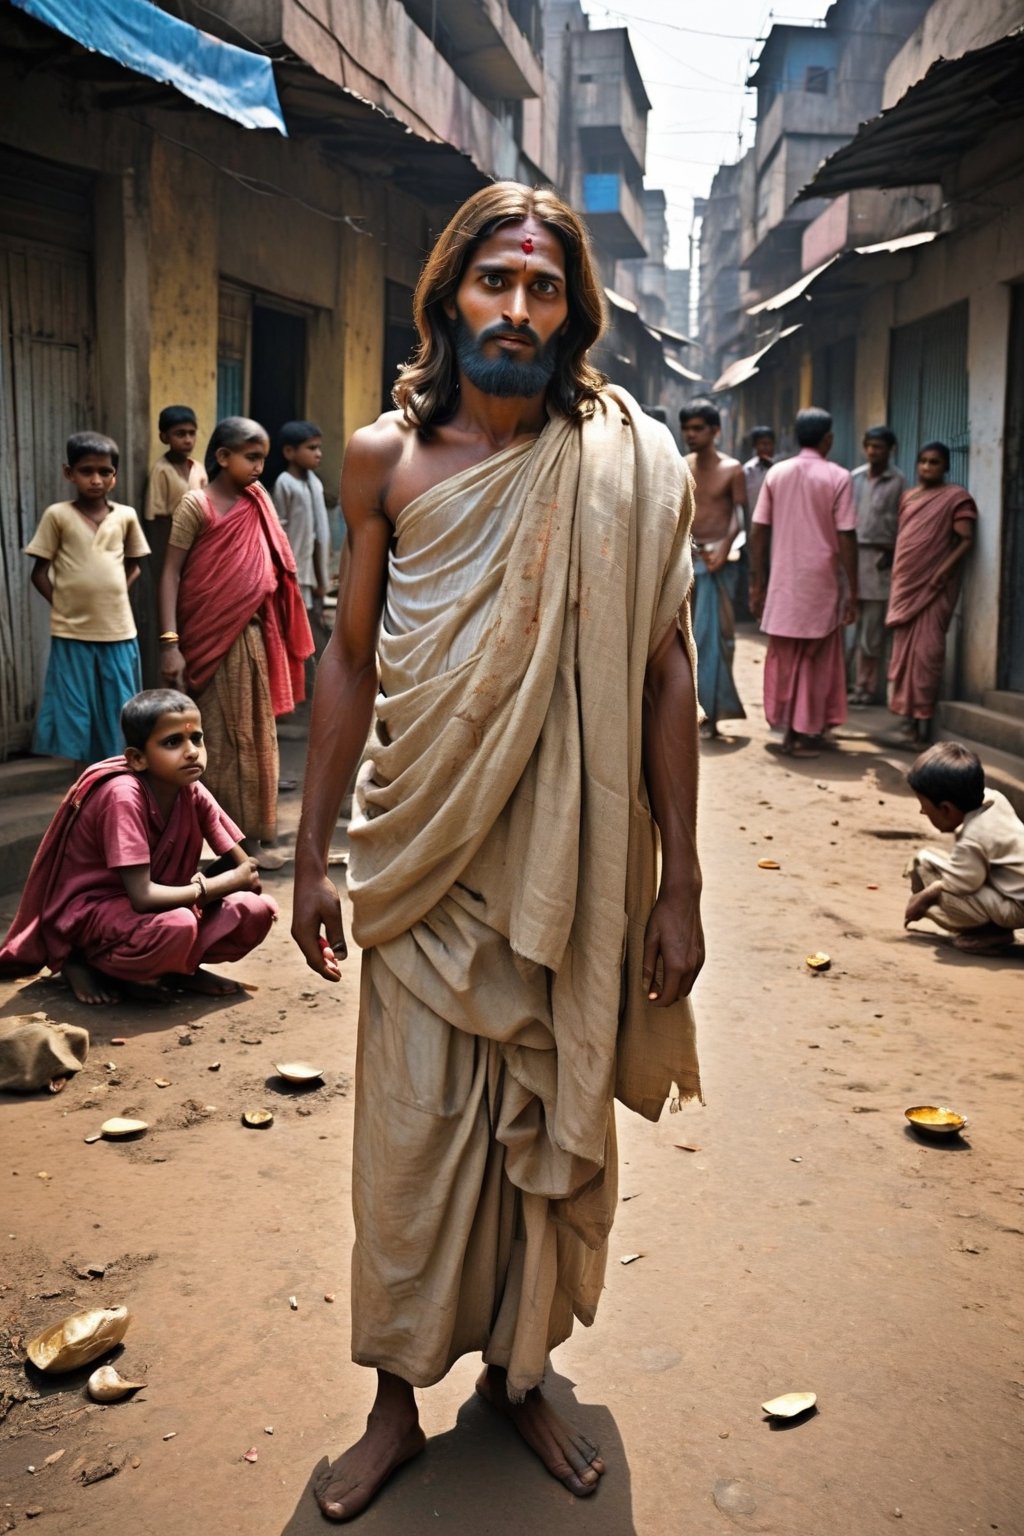 1 jesus and 1 india poor guy,
In particular, they show that the personality of Jesus is marked by both compassion and justice. Jesus felt love and expressed anger. His love was directed toward those who suffered. His anger was aimed at religious hypocrisy and hardness of heart. poverty and wealth, Maharashtra, India indian poor people stock pictures, royalty-free photos & images. Mumbai city, India. Mumbai cityscape with a big ...Free Kid Slum photo and picture. kid slum poverty poor · Free Poor Family Indian Family vector and picture · poor family · Free Indian Vegetables photo and ...